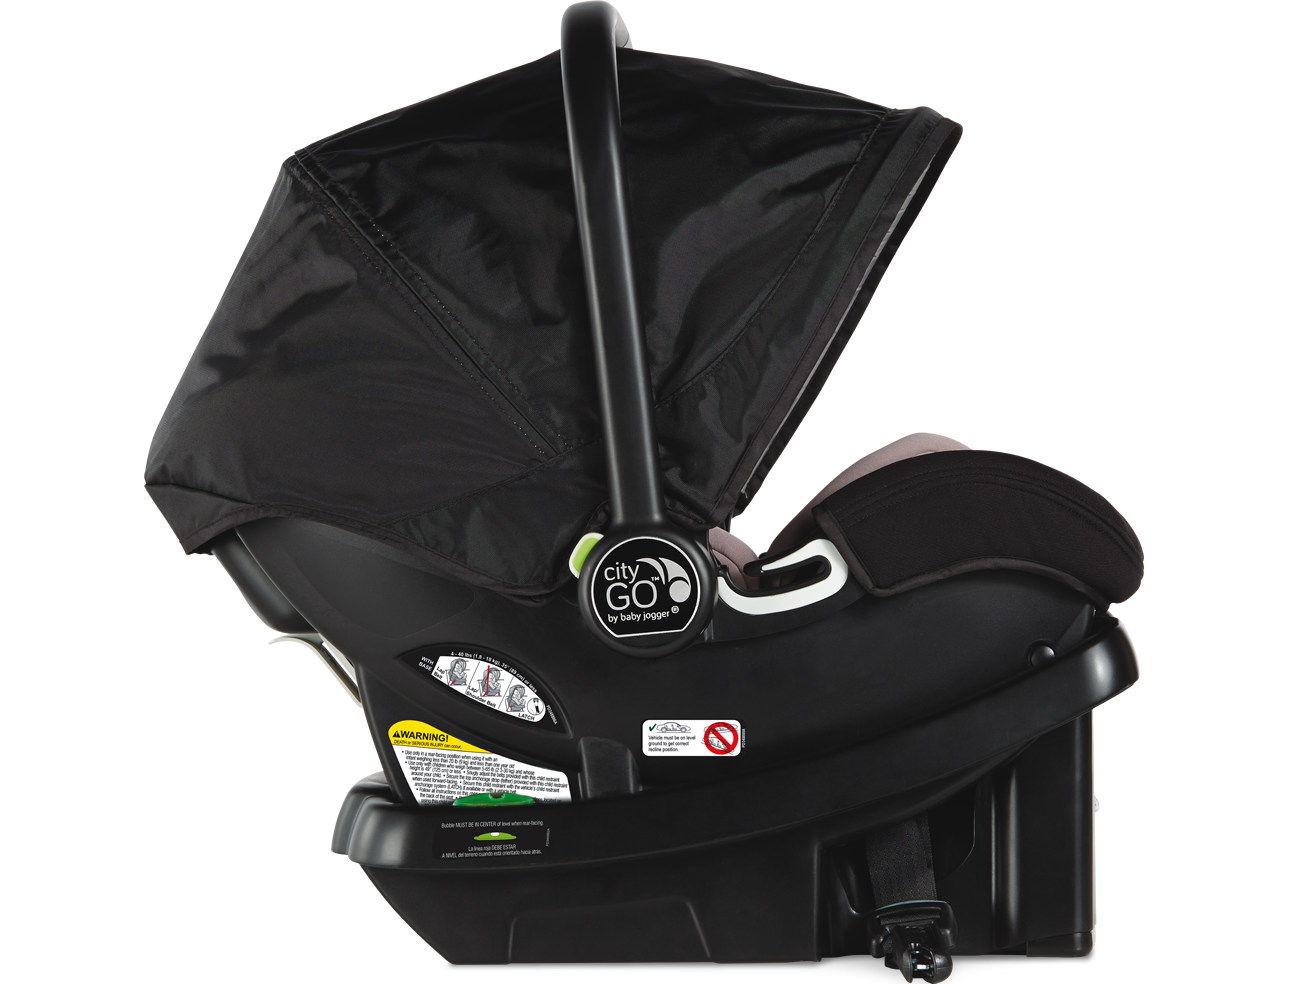 city go car seat weight